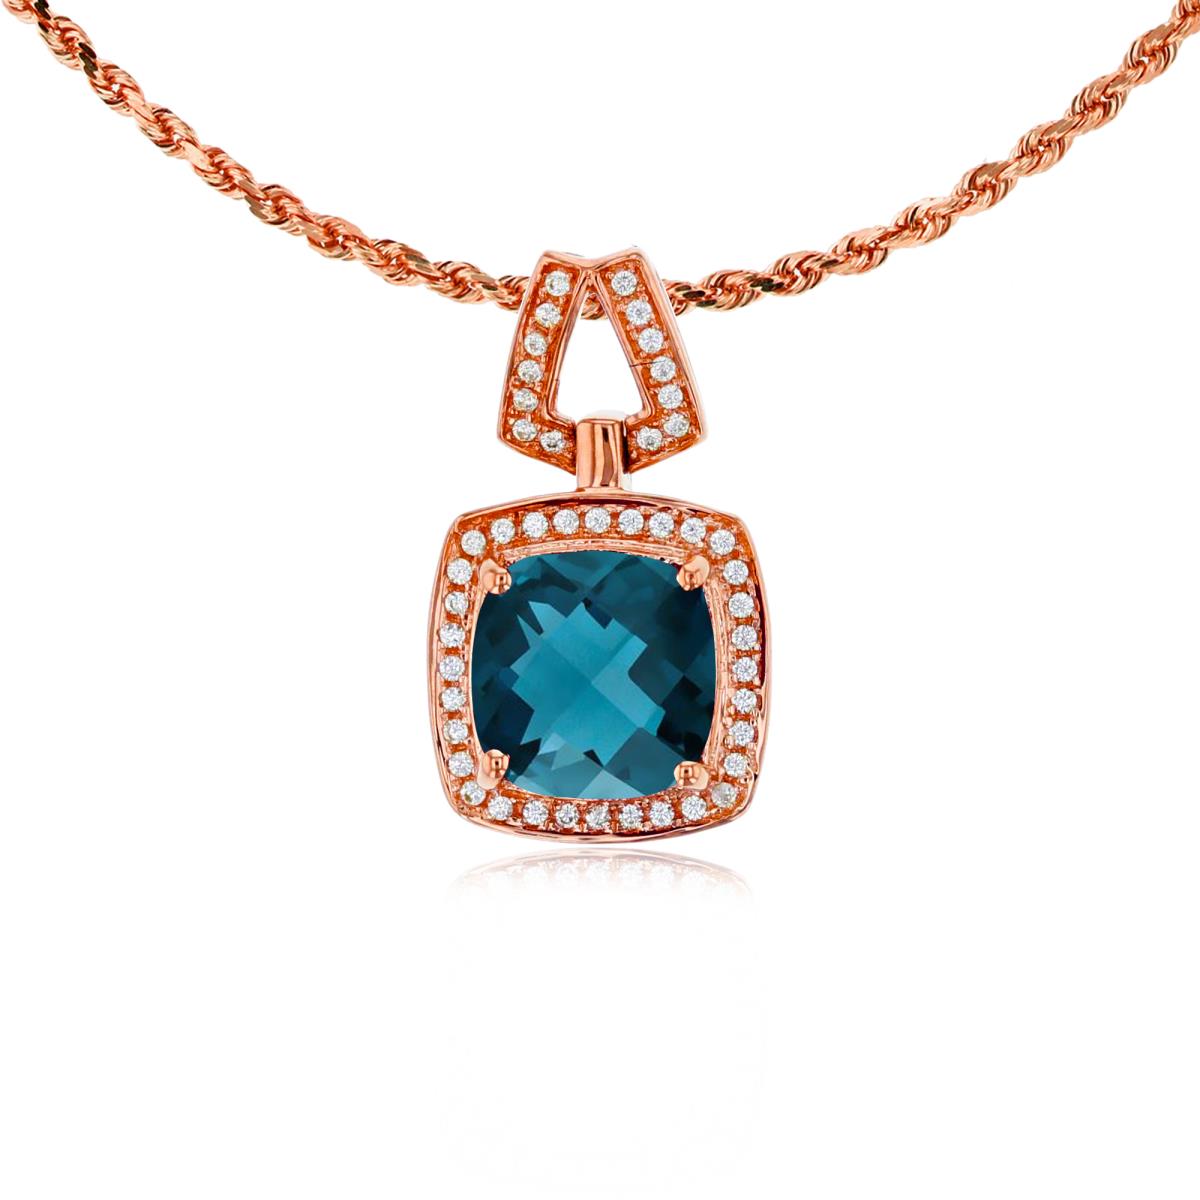 10K Rose Gold 7mm Cushion London Blue Topaz & 0.10 CTTW Diamond Halo 18" Rope Chain Necklace